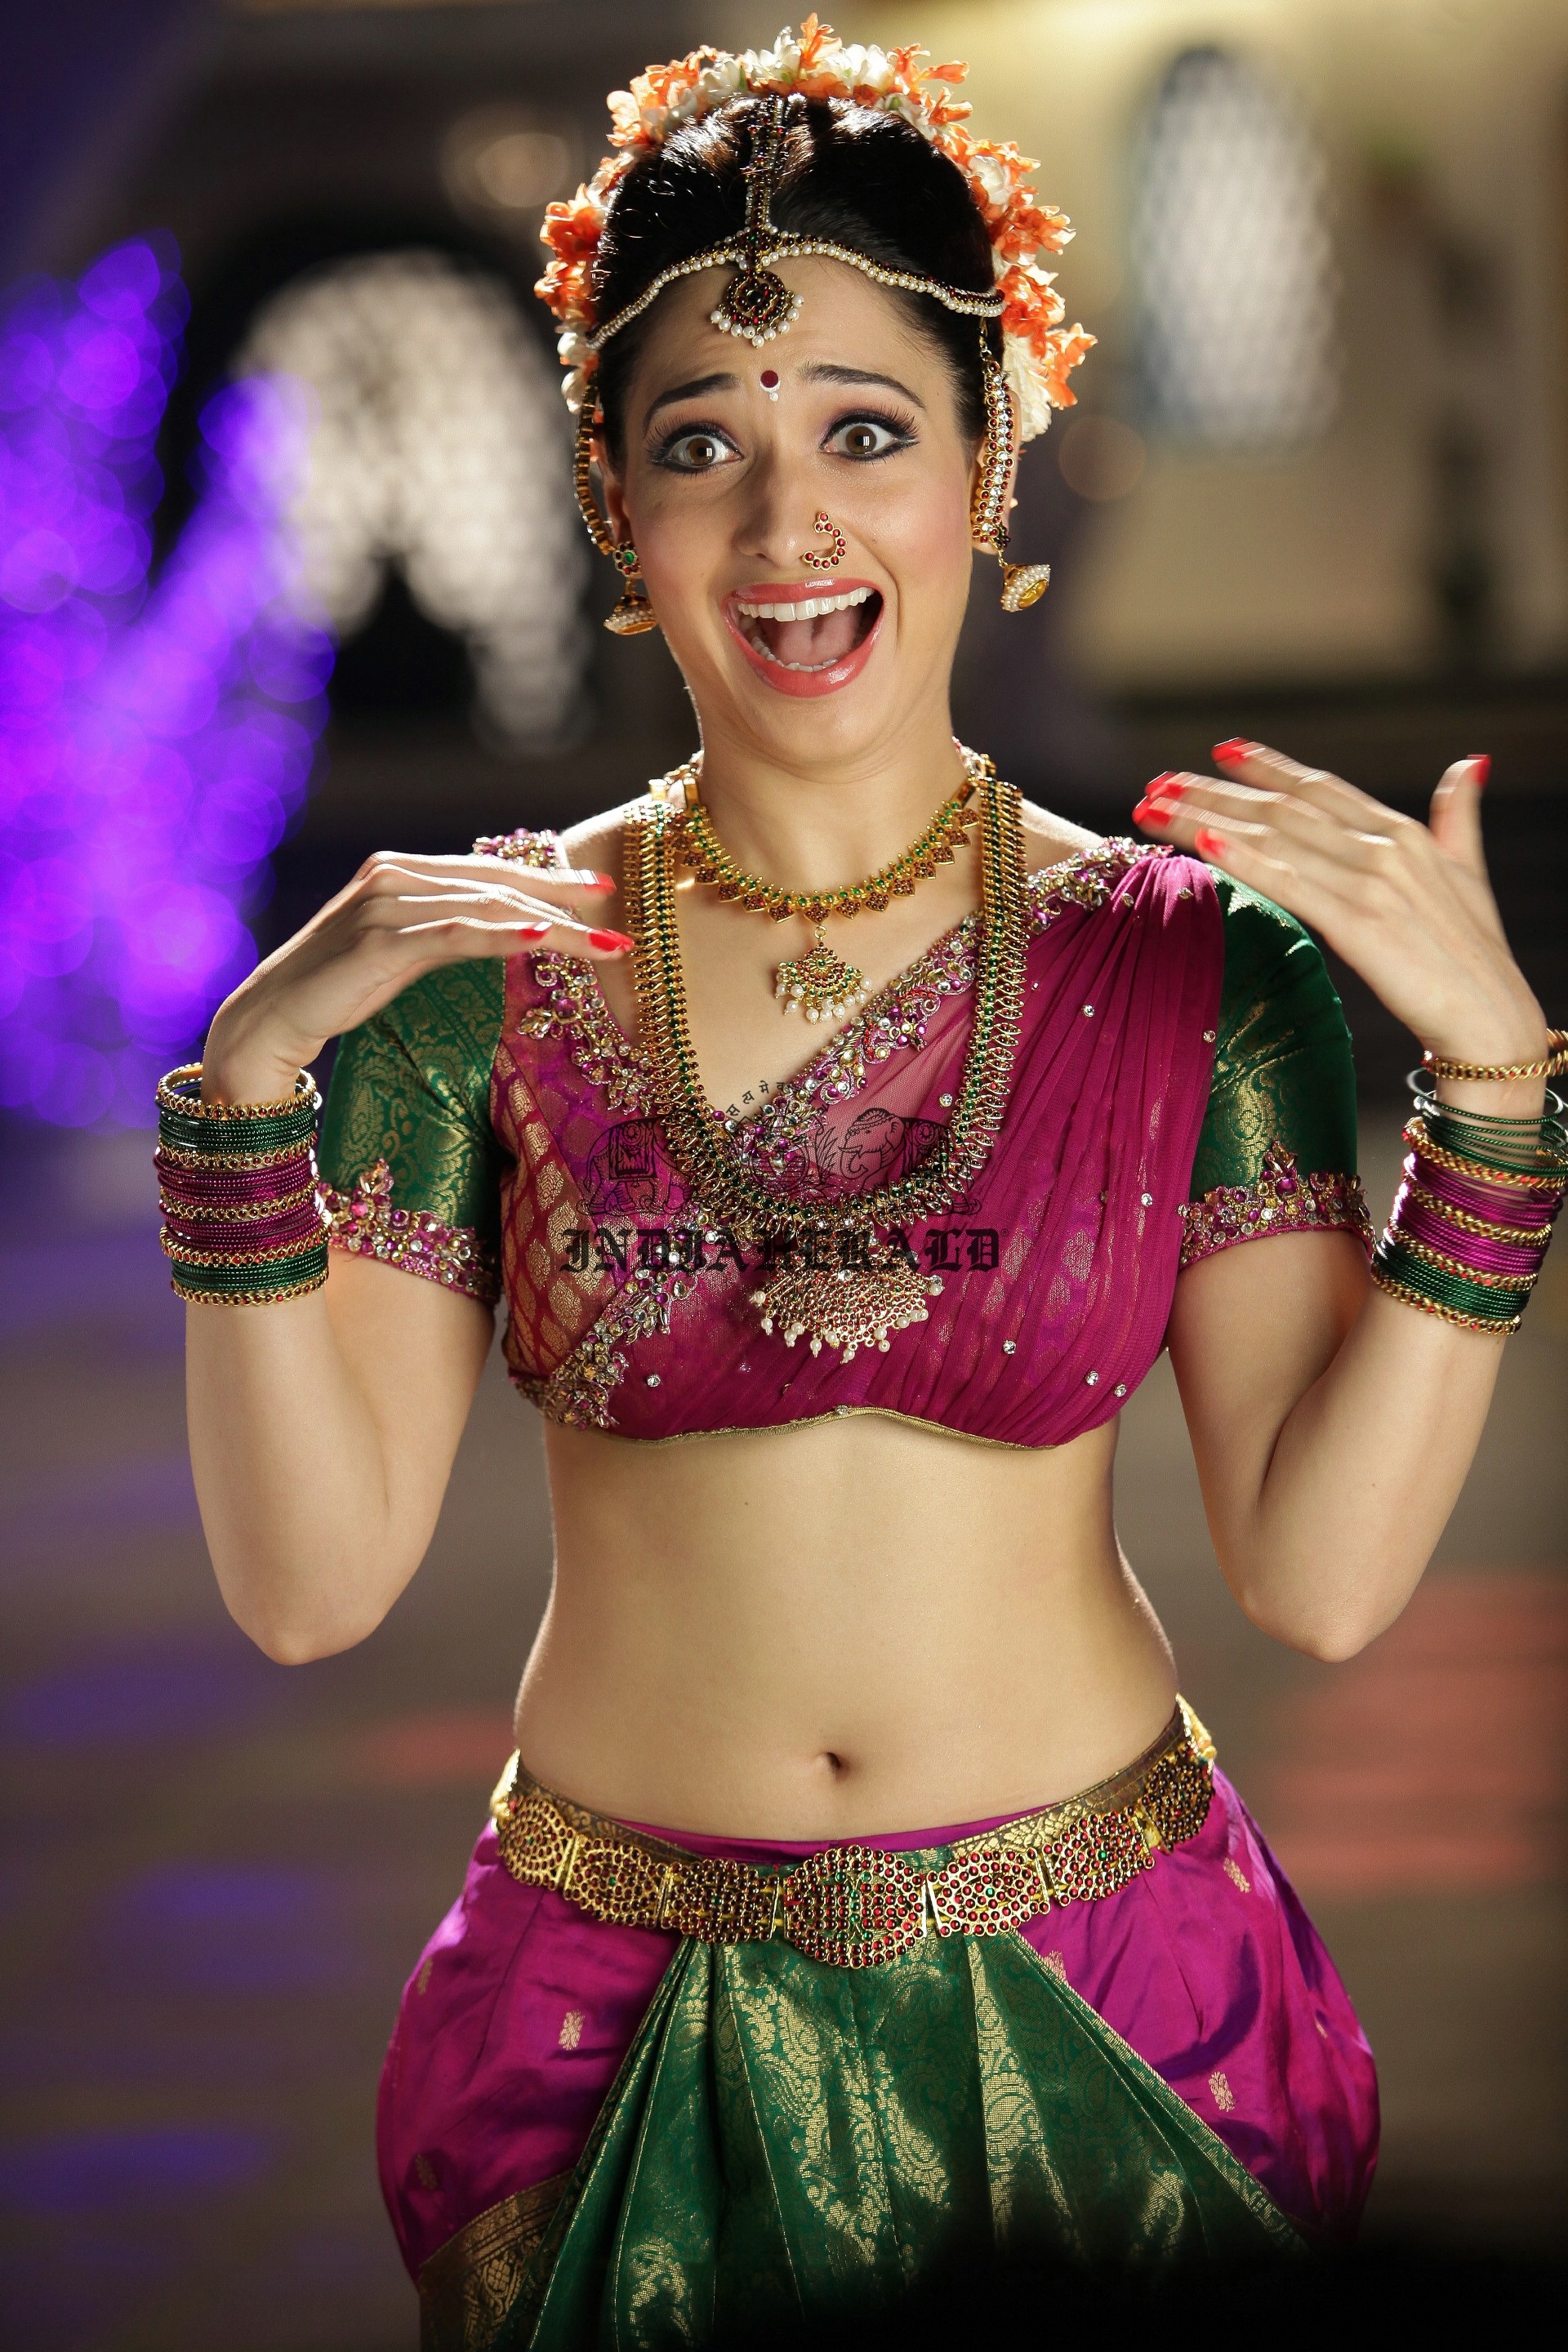 Hottest High Clarity Photos of Tamanna in Saree exposing her navel and midriff Set 2